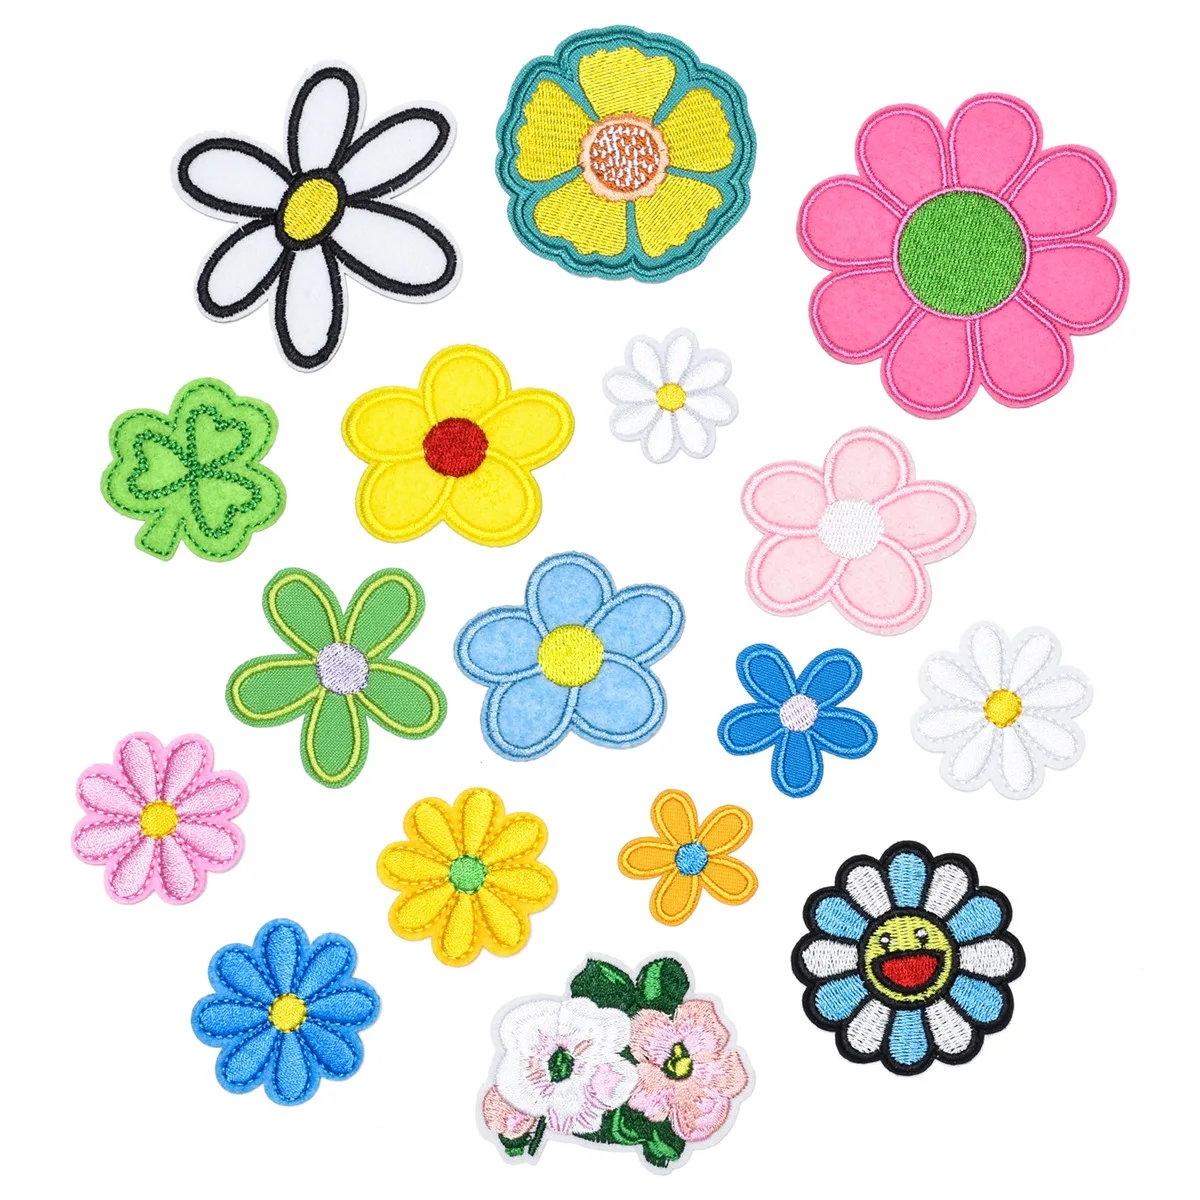 

17Pcs/set Sun Flowers Smiley Series For on Child Clothes DIY Ironing on Embroidered Patches Hat Jeans Sew Patch Applique Badge